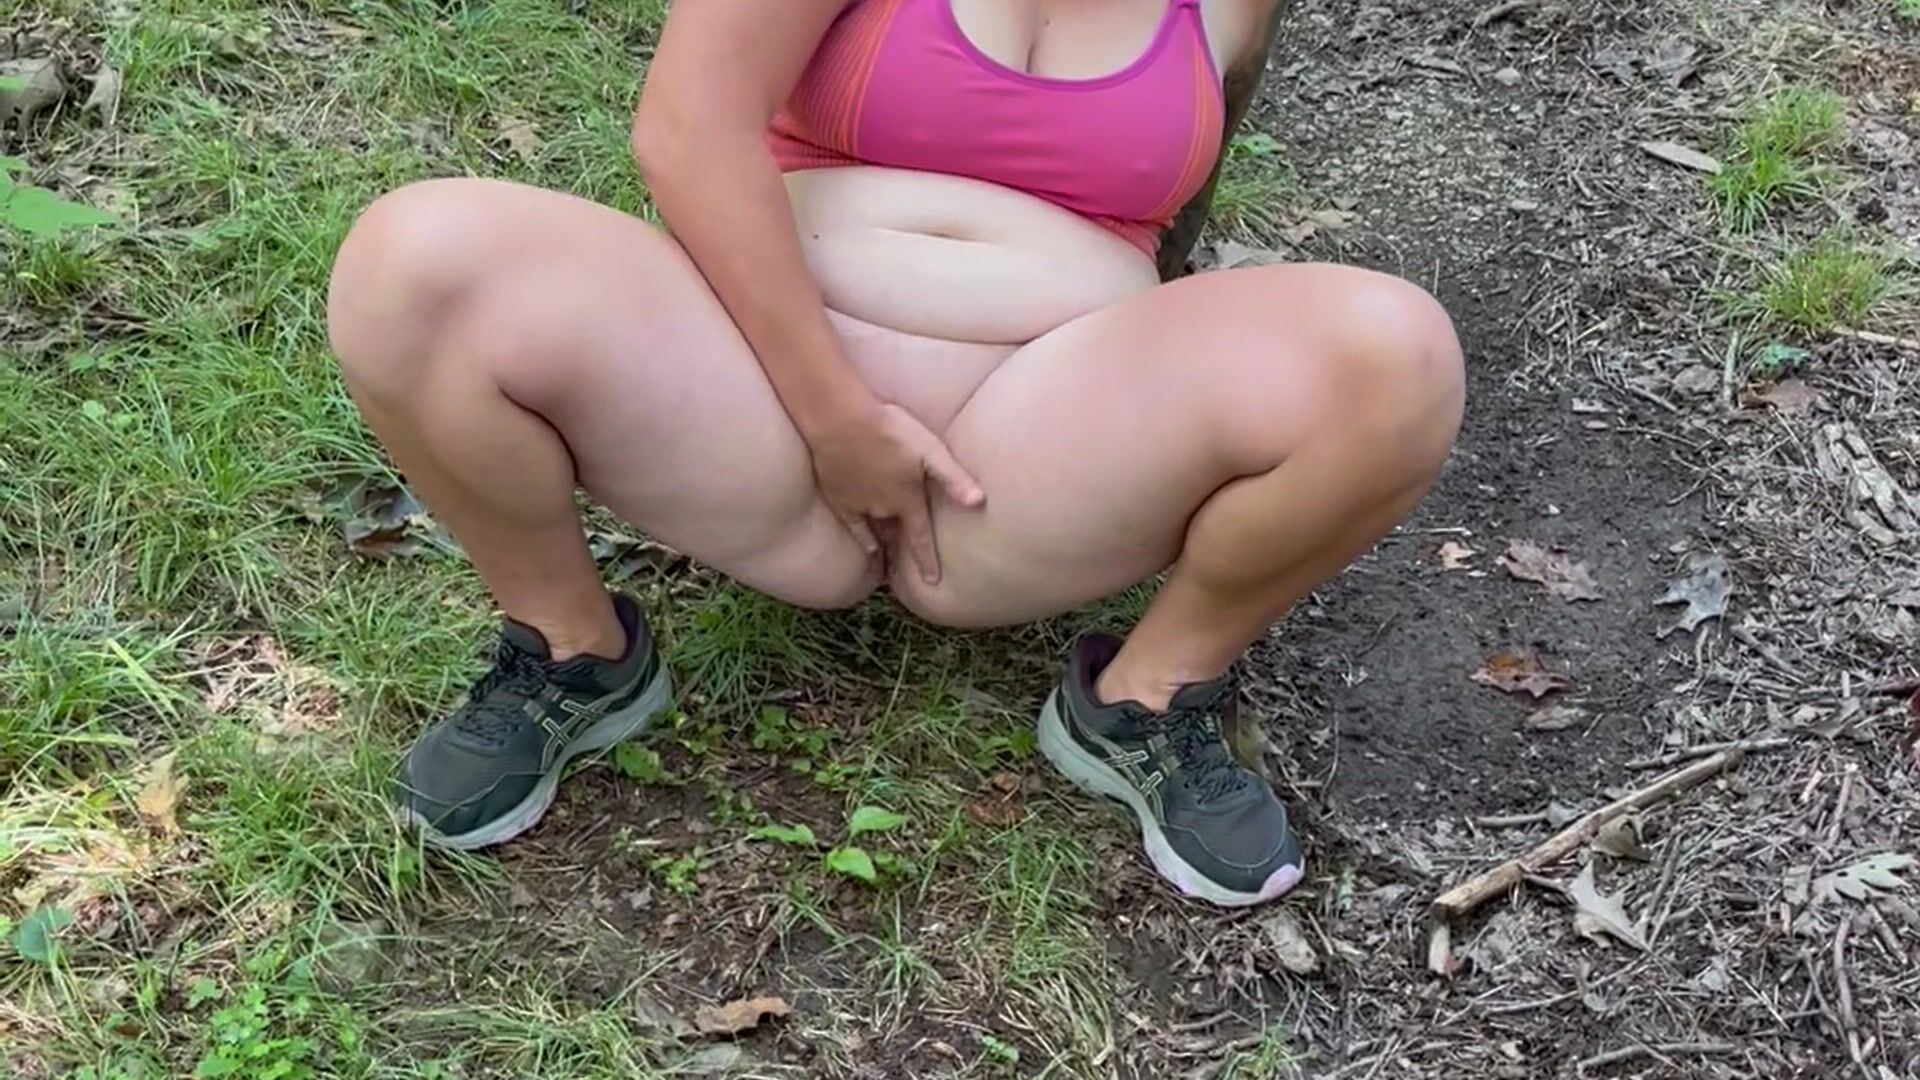 Squirt break while on a hike